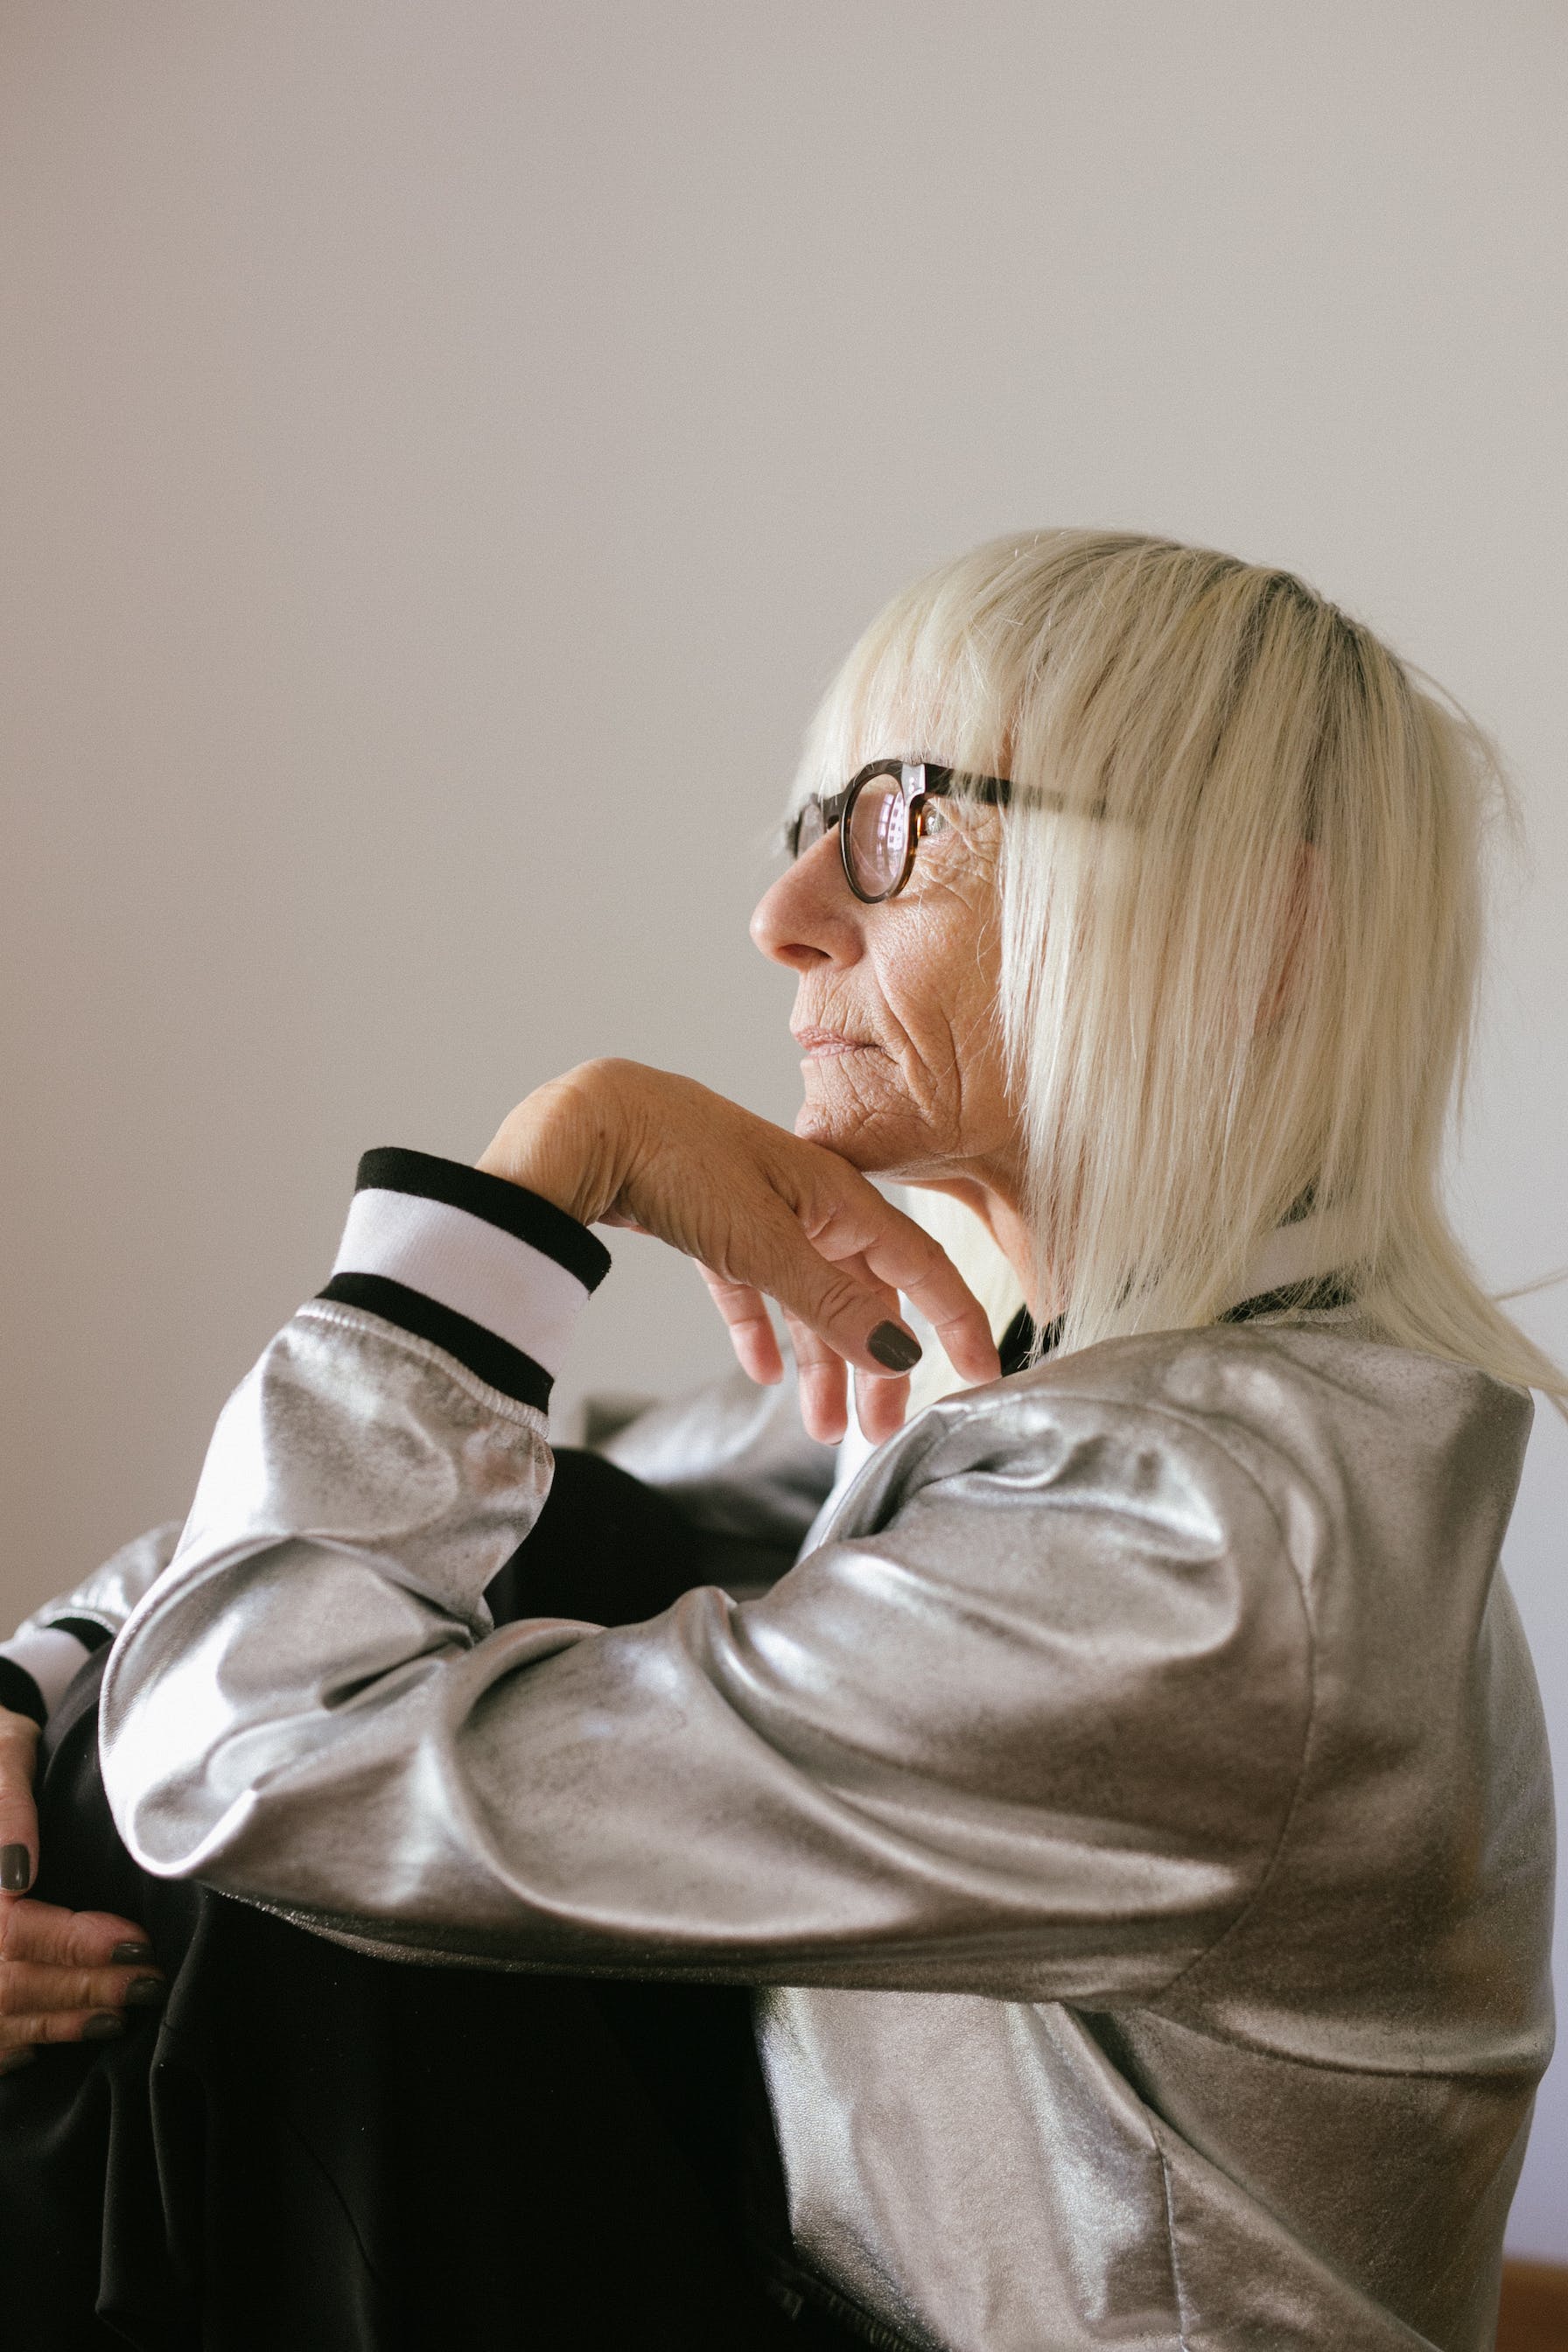 Upset older woman looking away from the camera | Source: Pexels